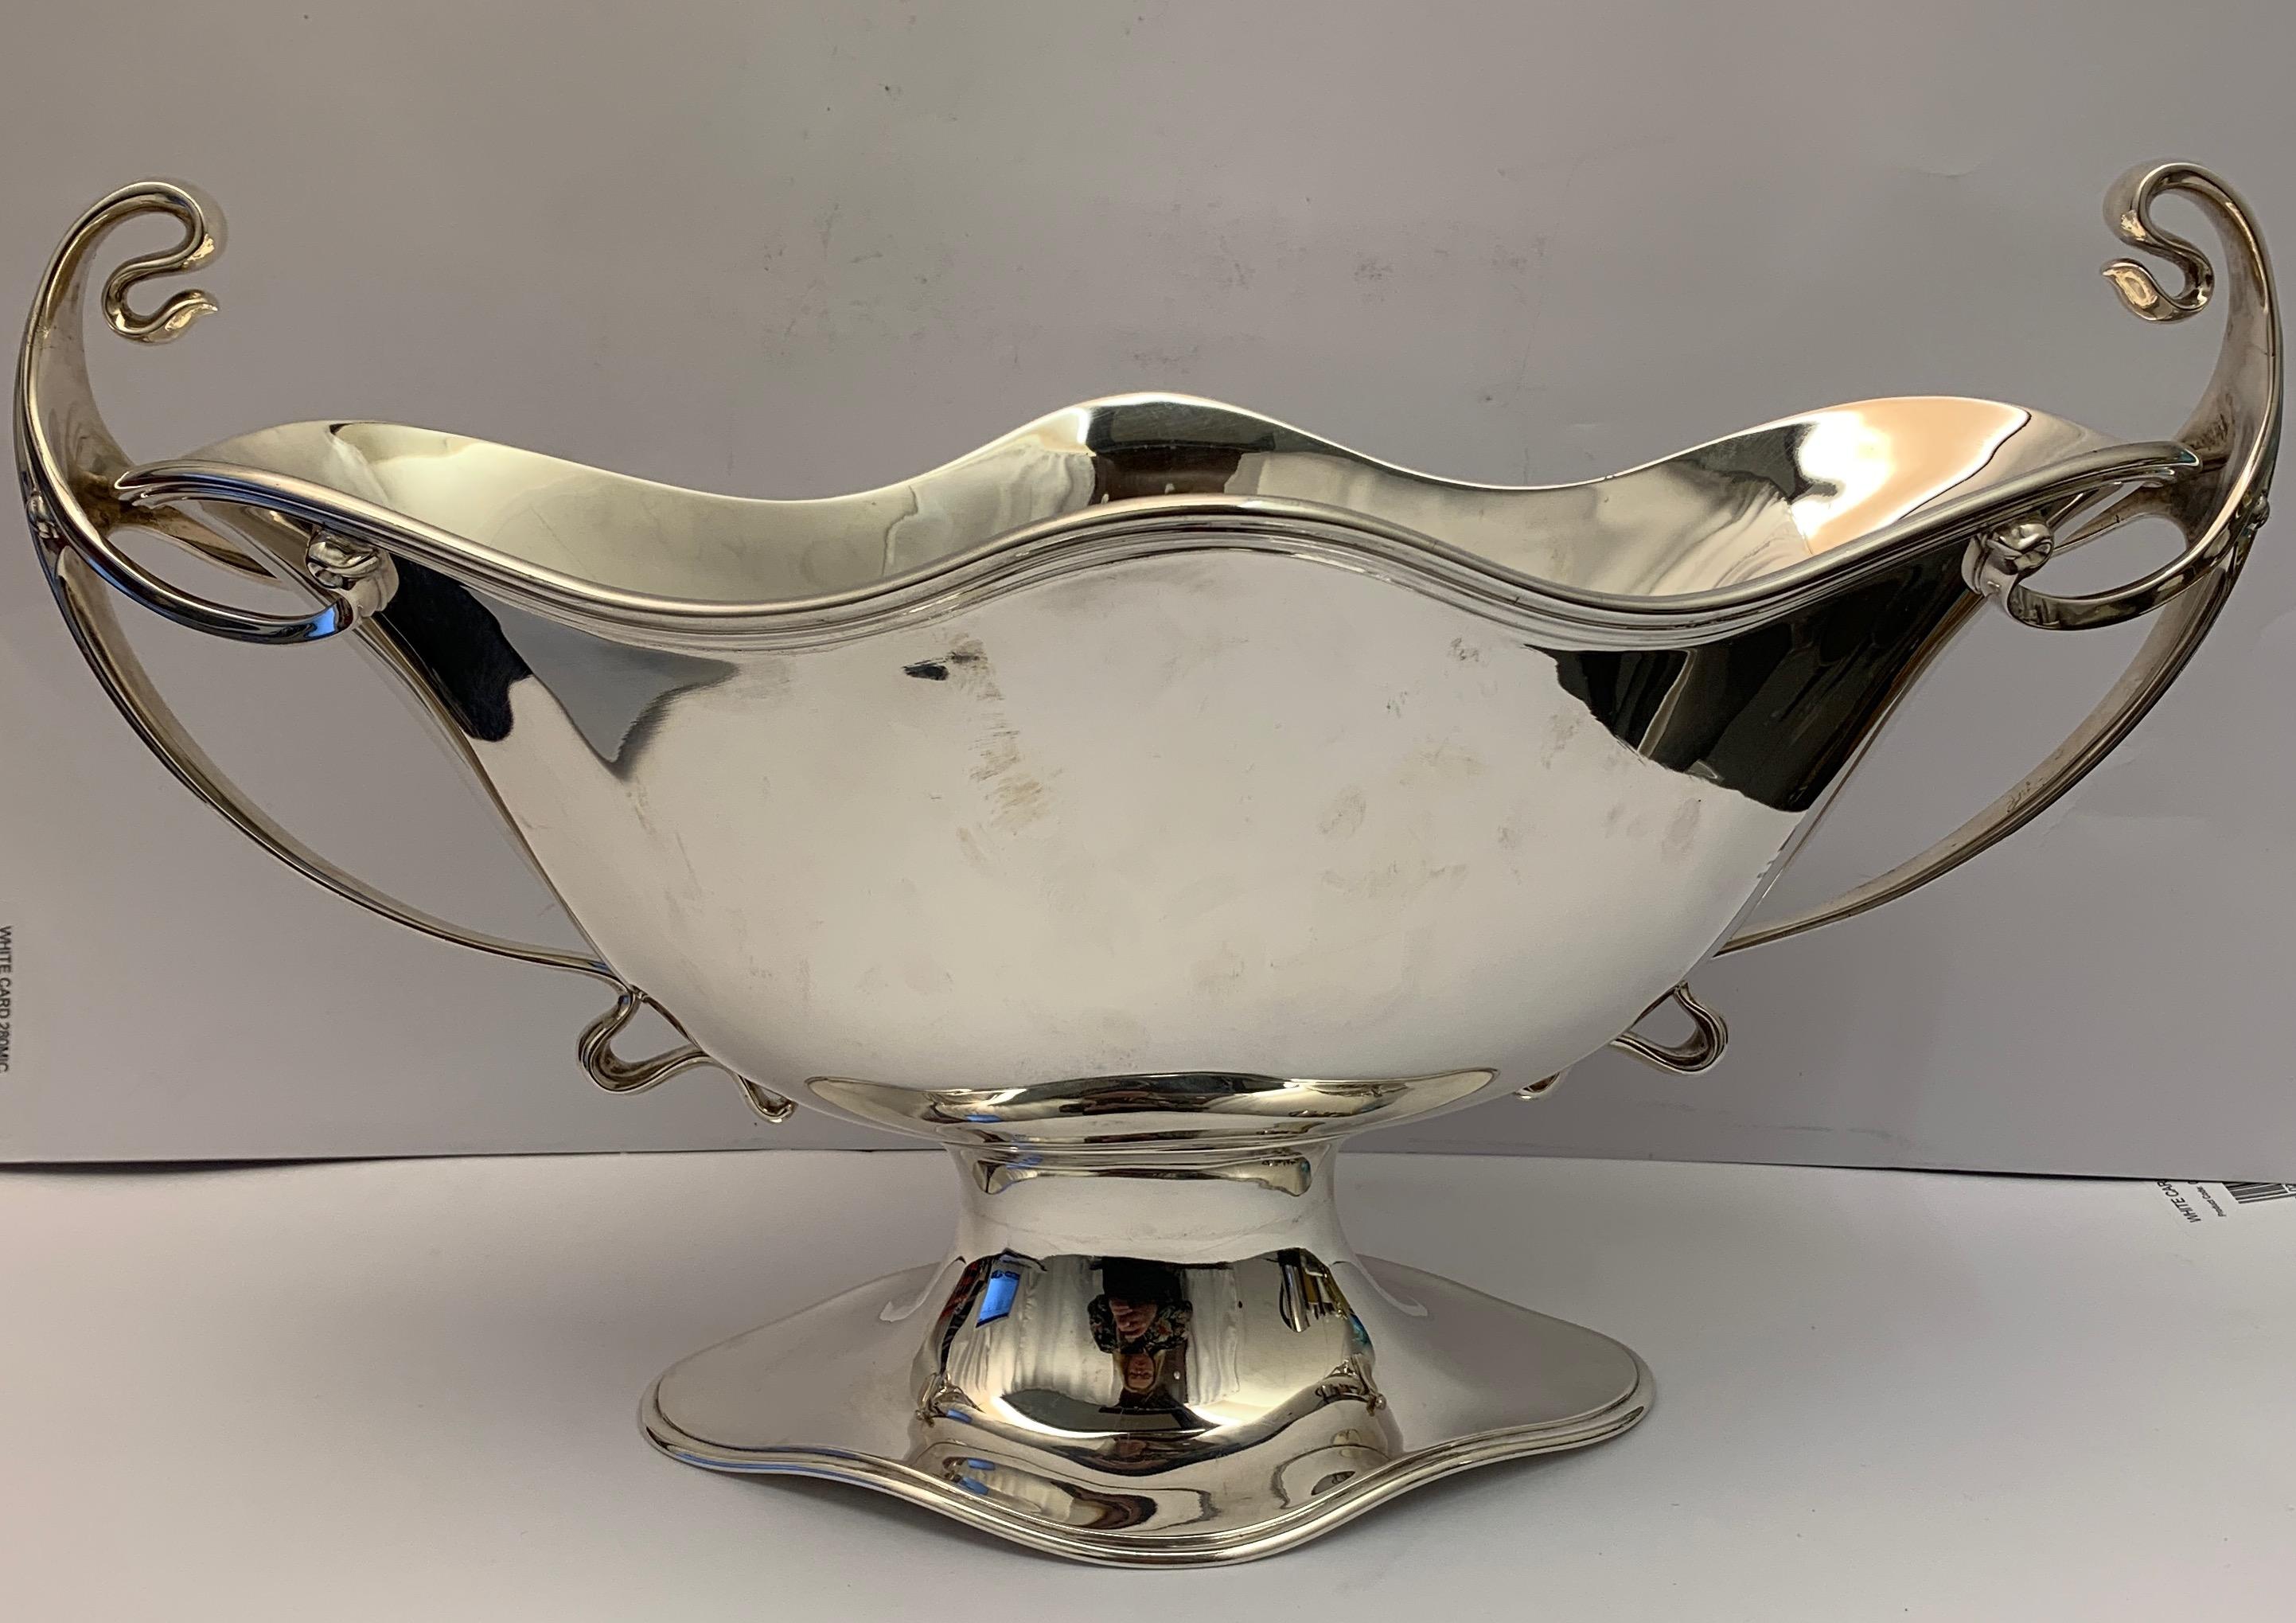 A Large Two Handled Silver Centrepiece by Elkington  In Good Condition For Sale In London, London